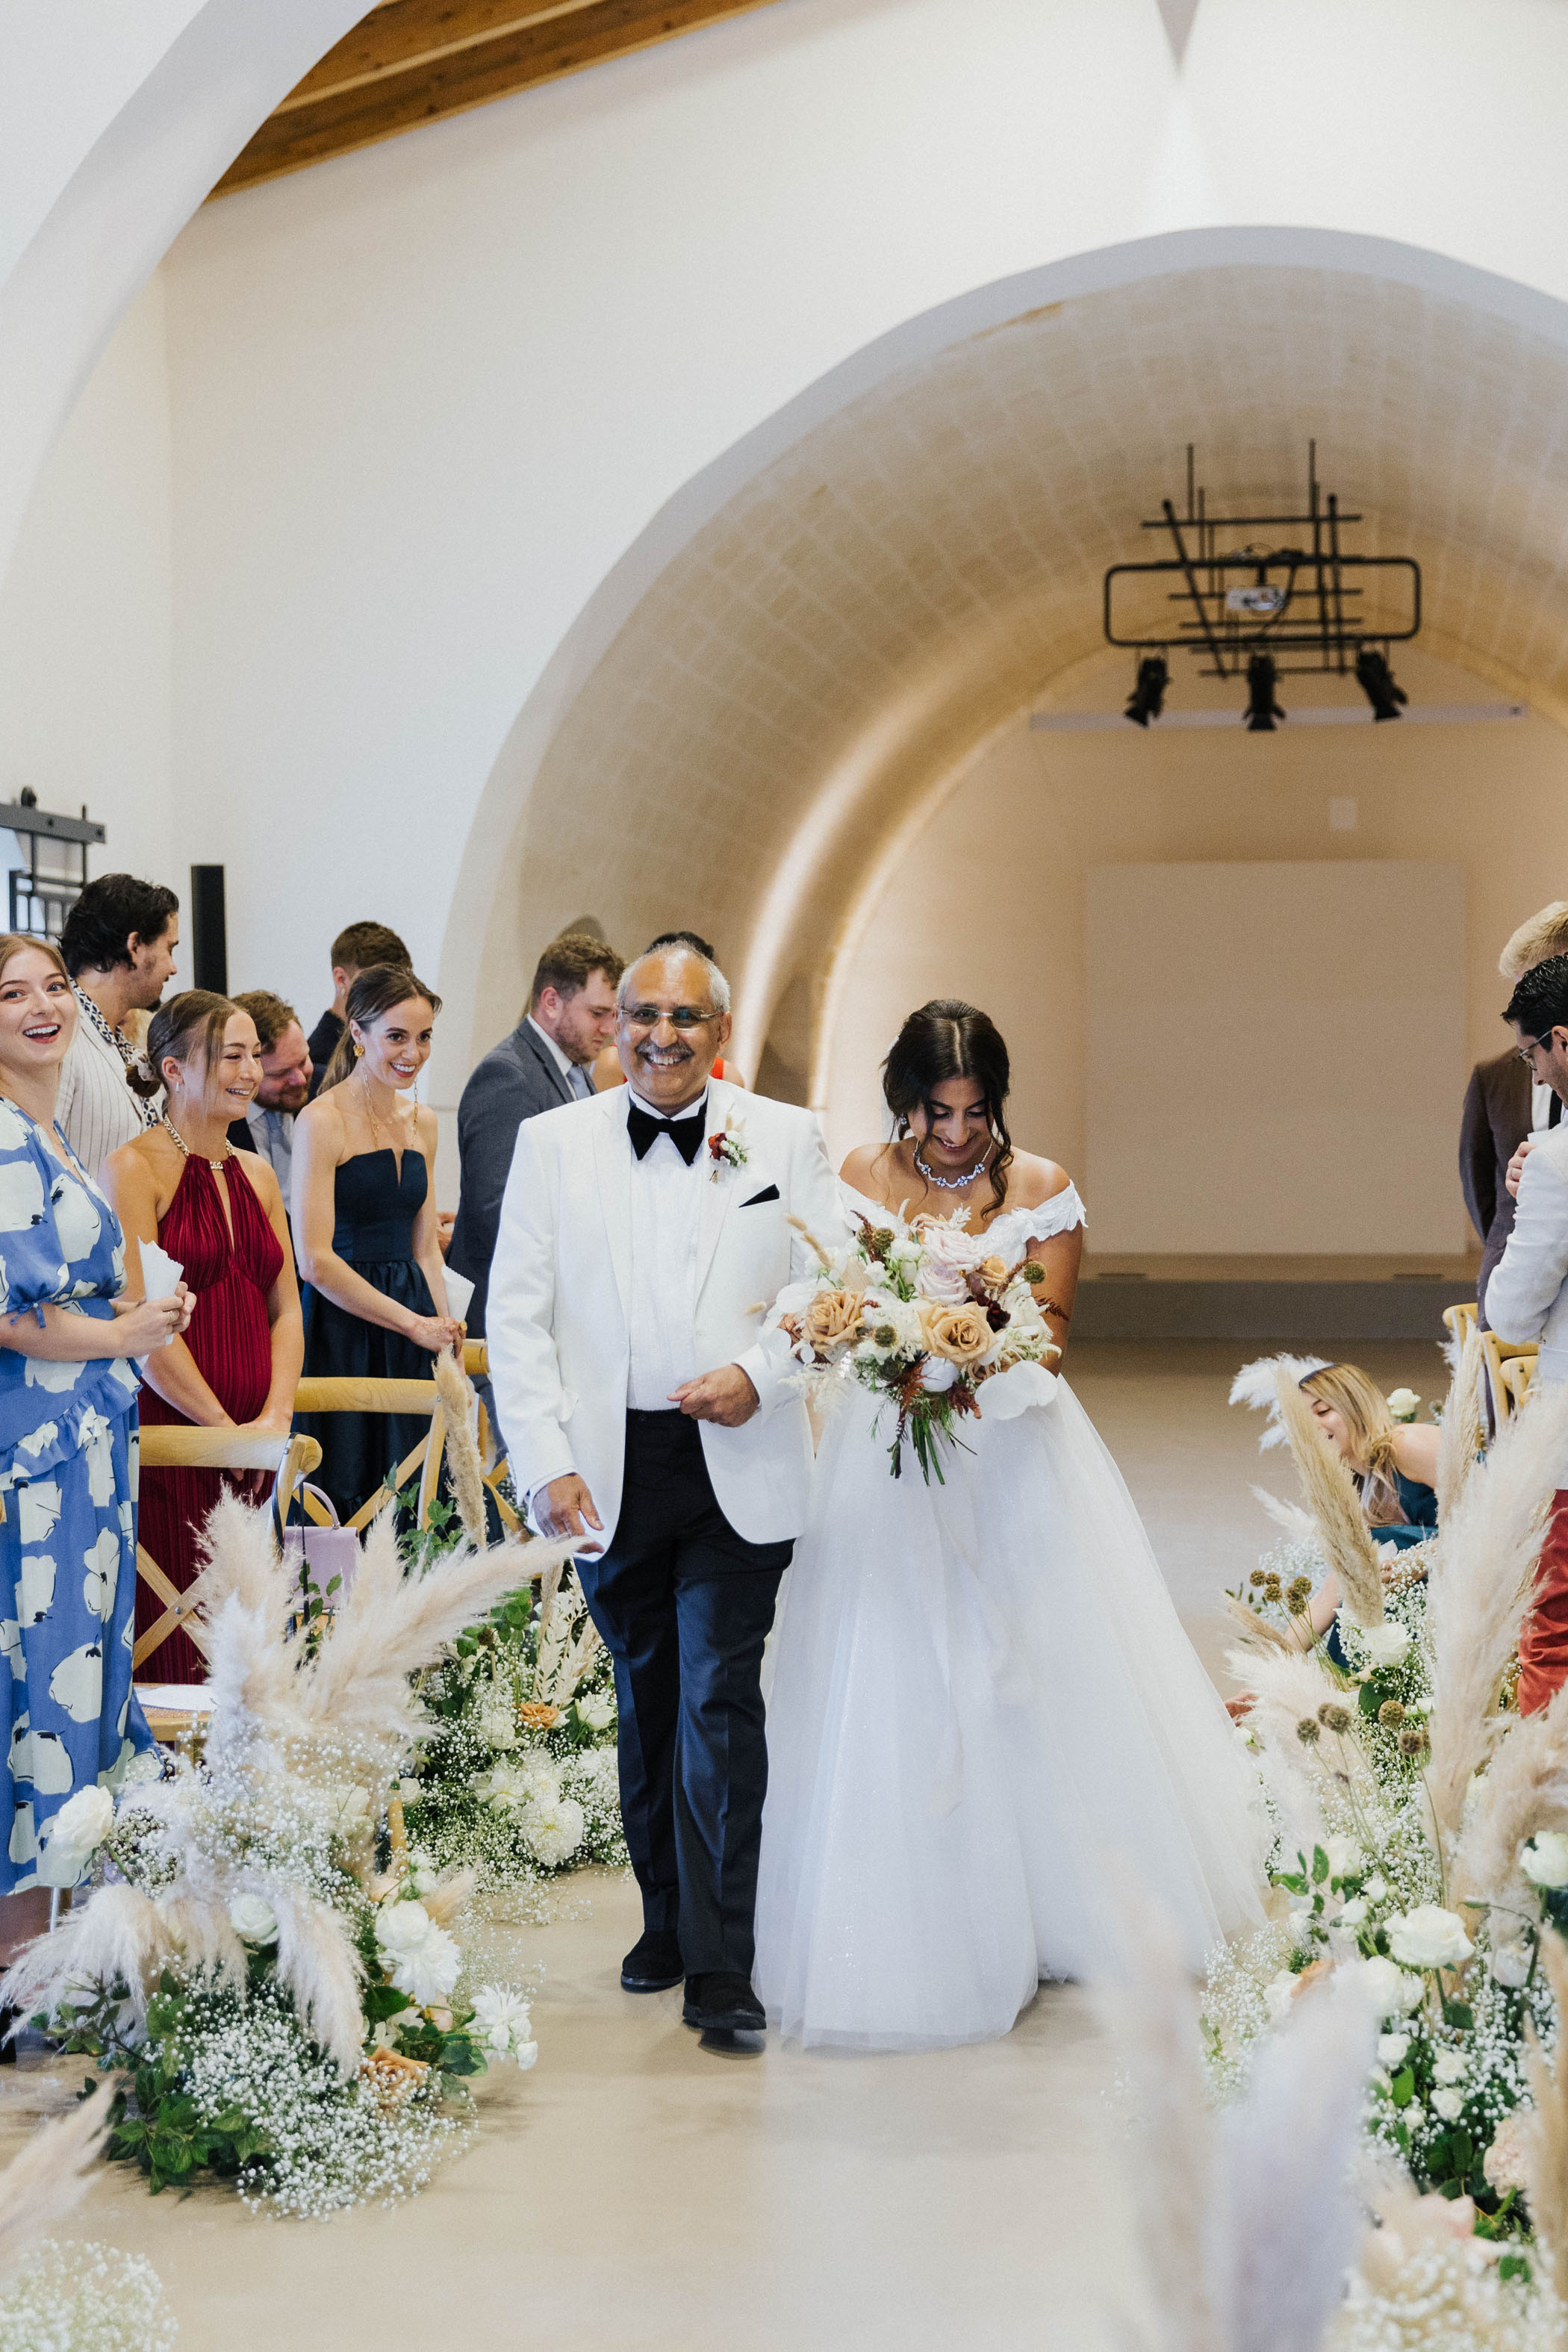 A Wedding in a Gorgeous Winery in Puglia Where Even the Rain Was Beautiful